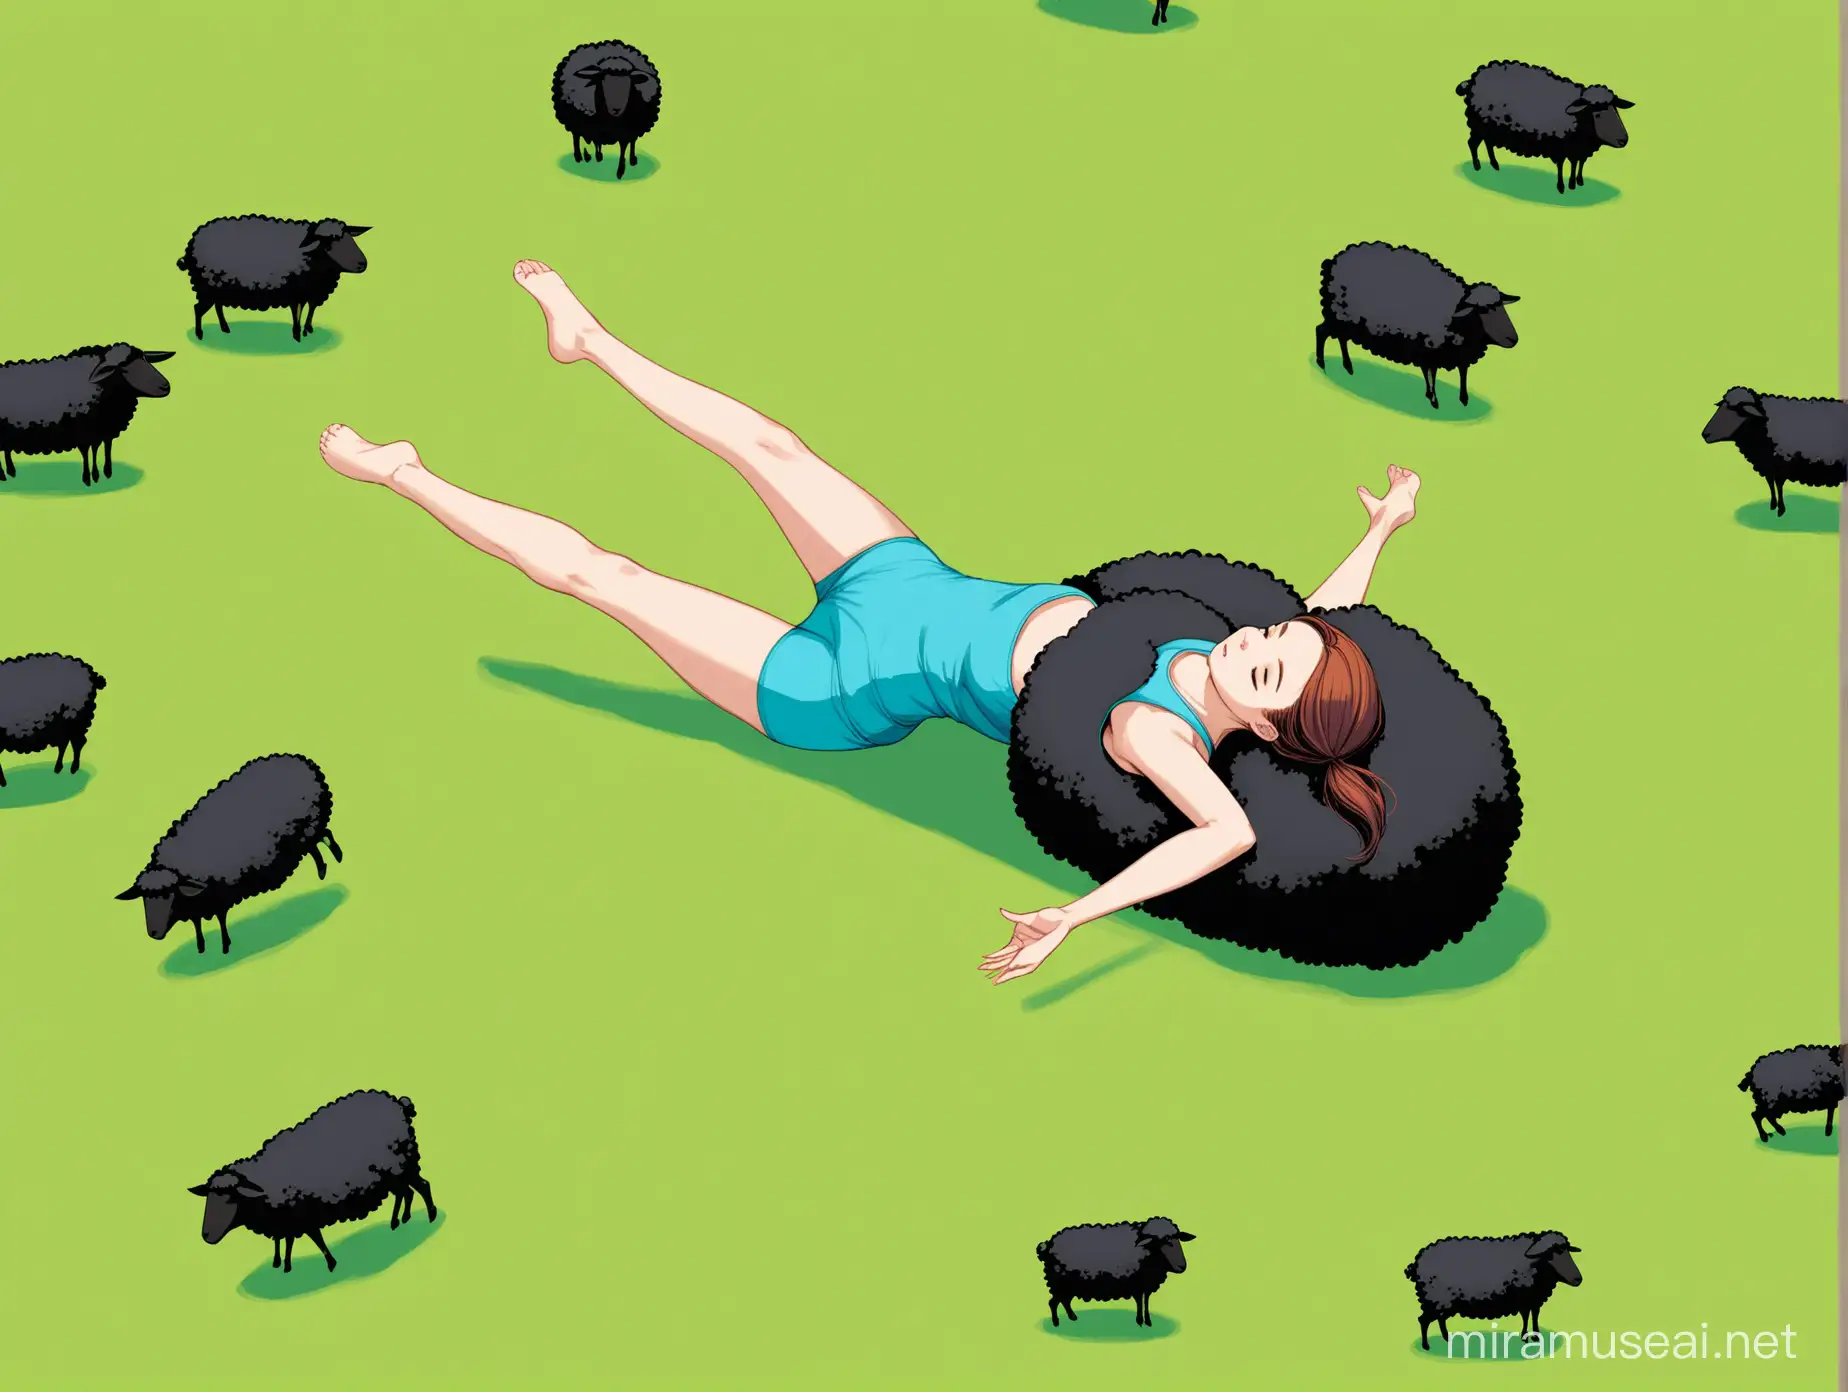 Woman Practicing Yoga Surrounded by Jumping Black Sheep